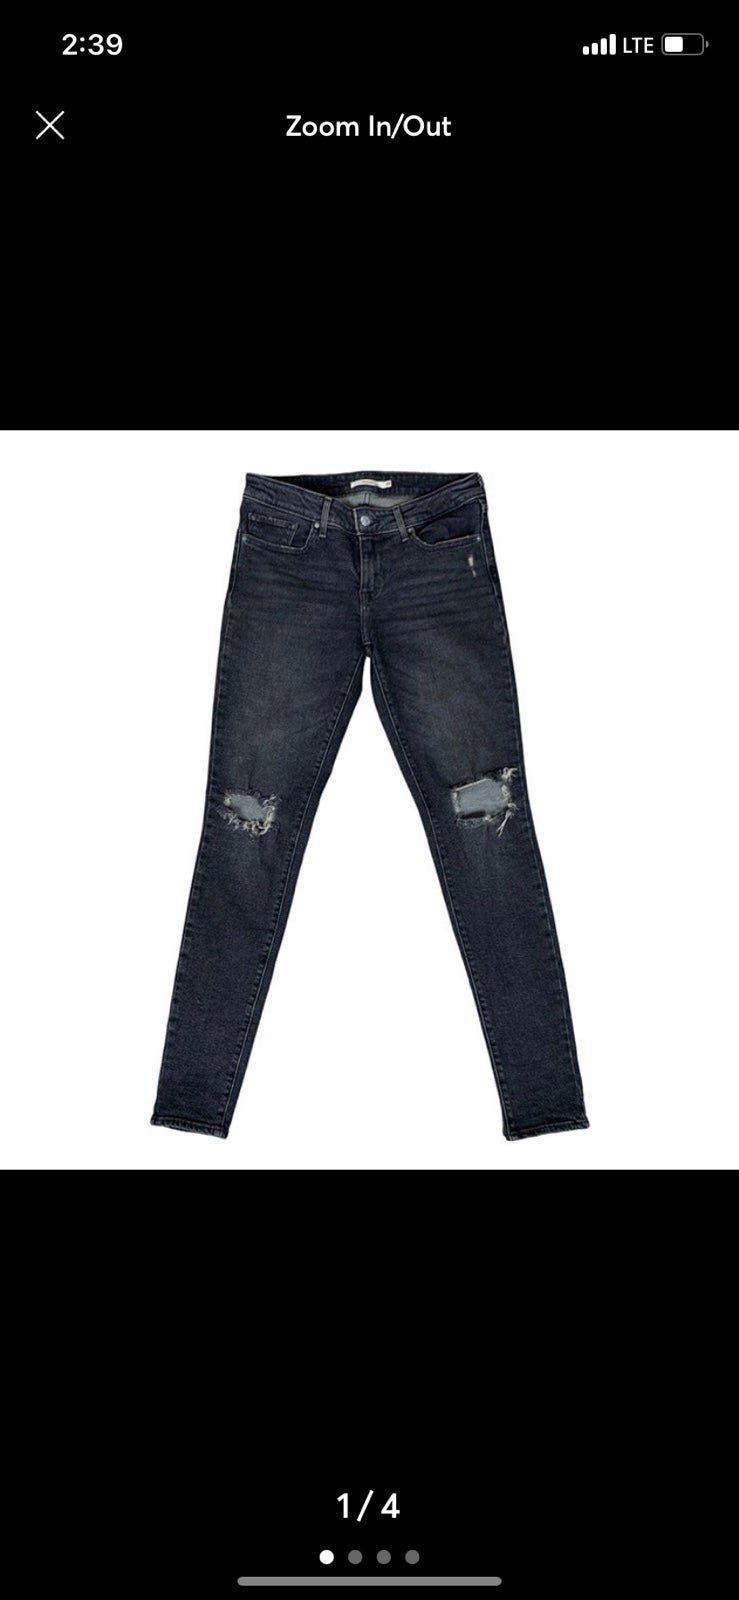 Classic Levis 711 black skinny ieOHwLMqR just for you